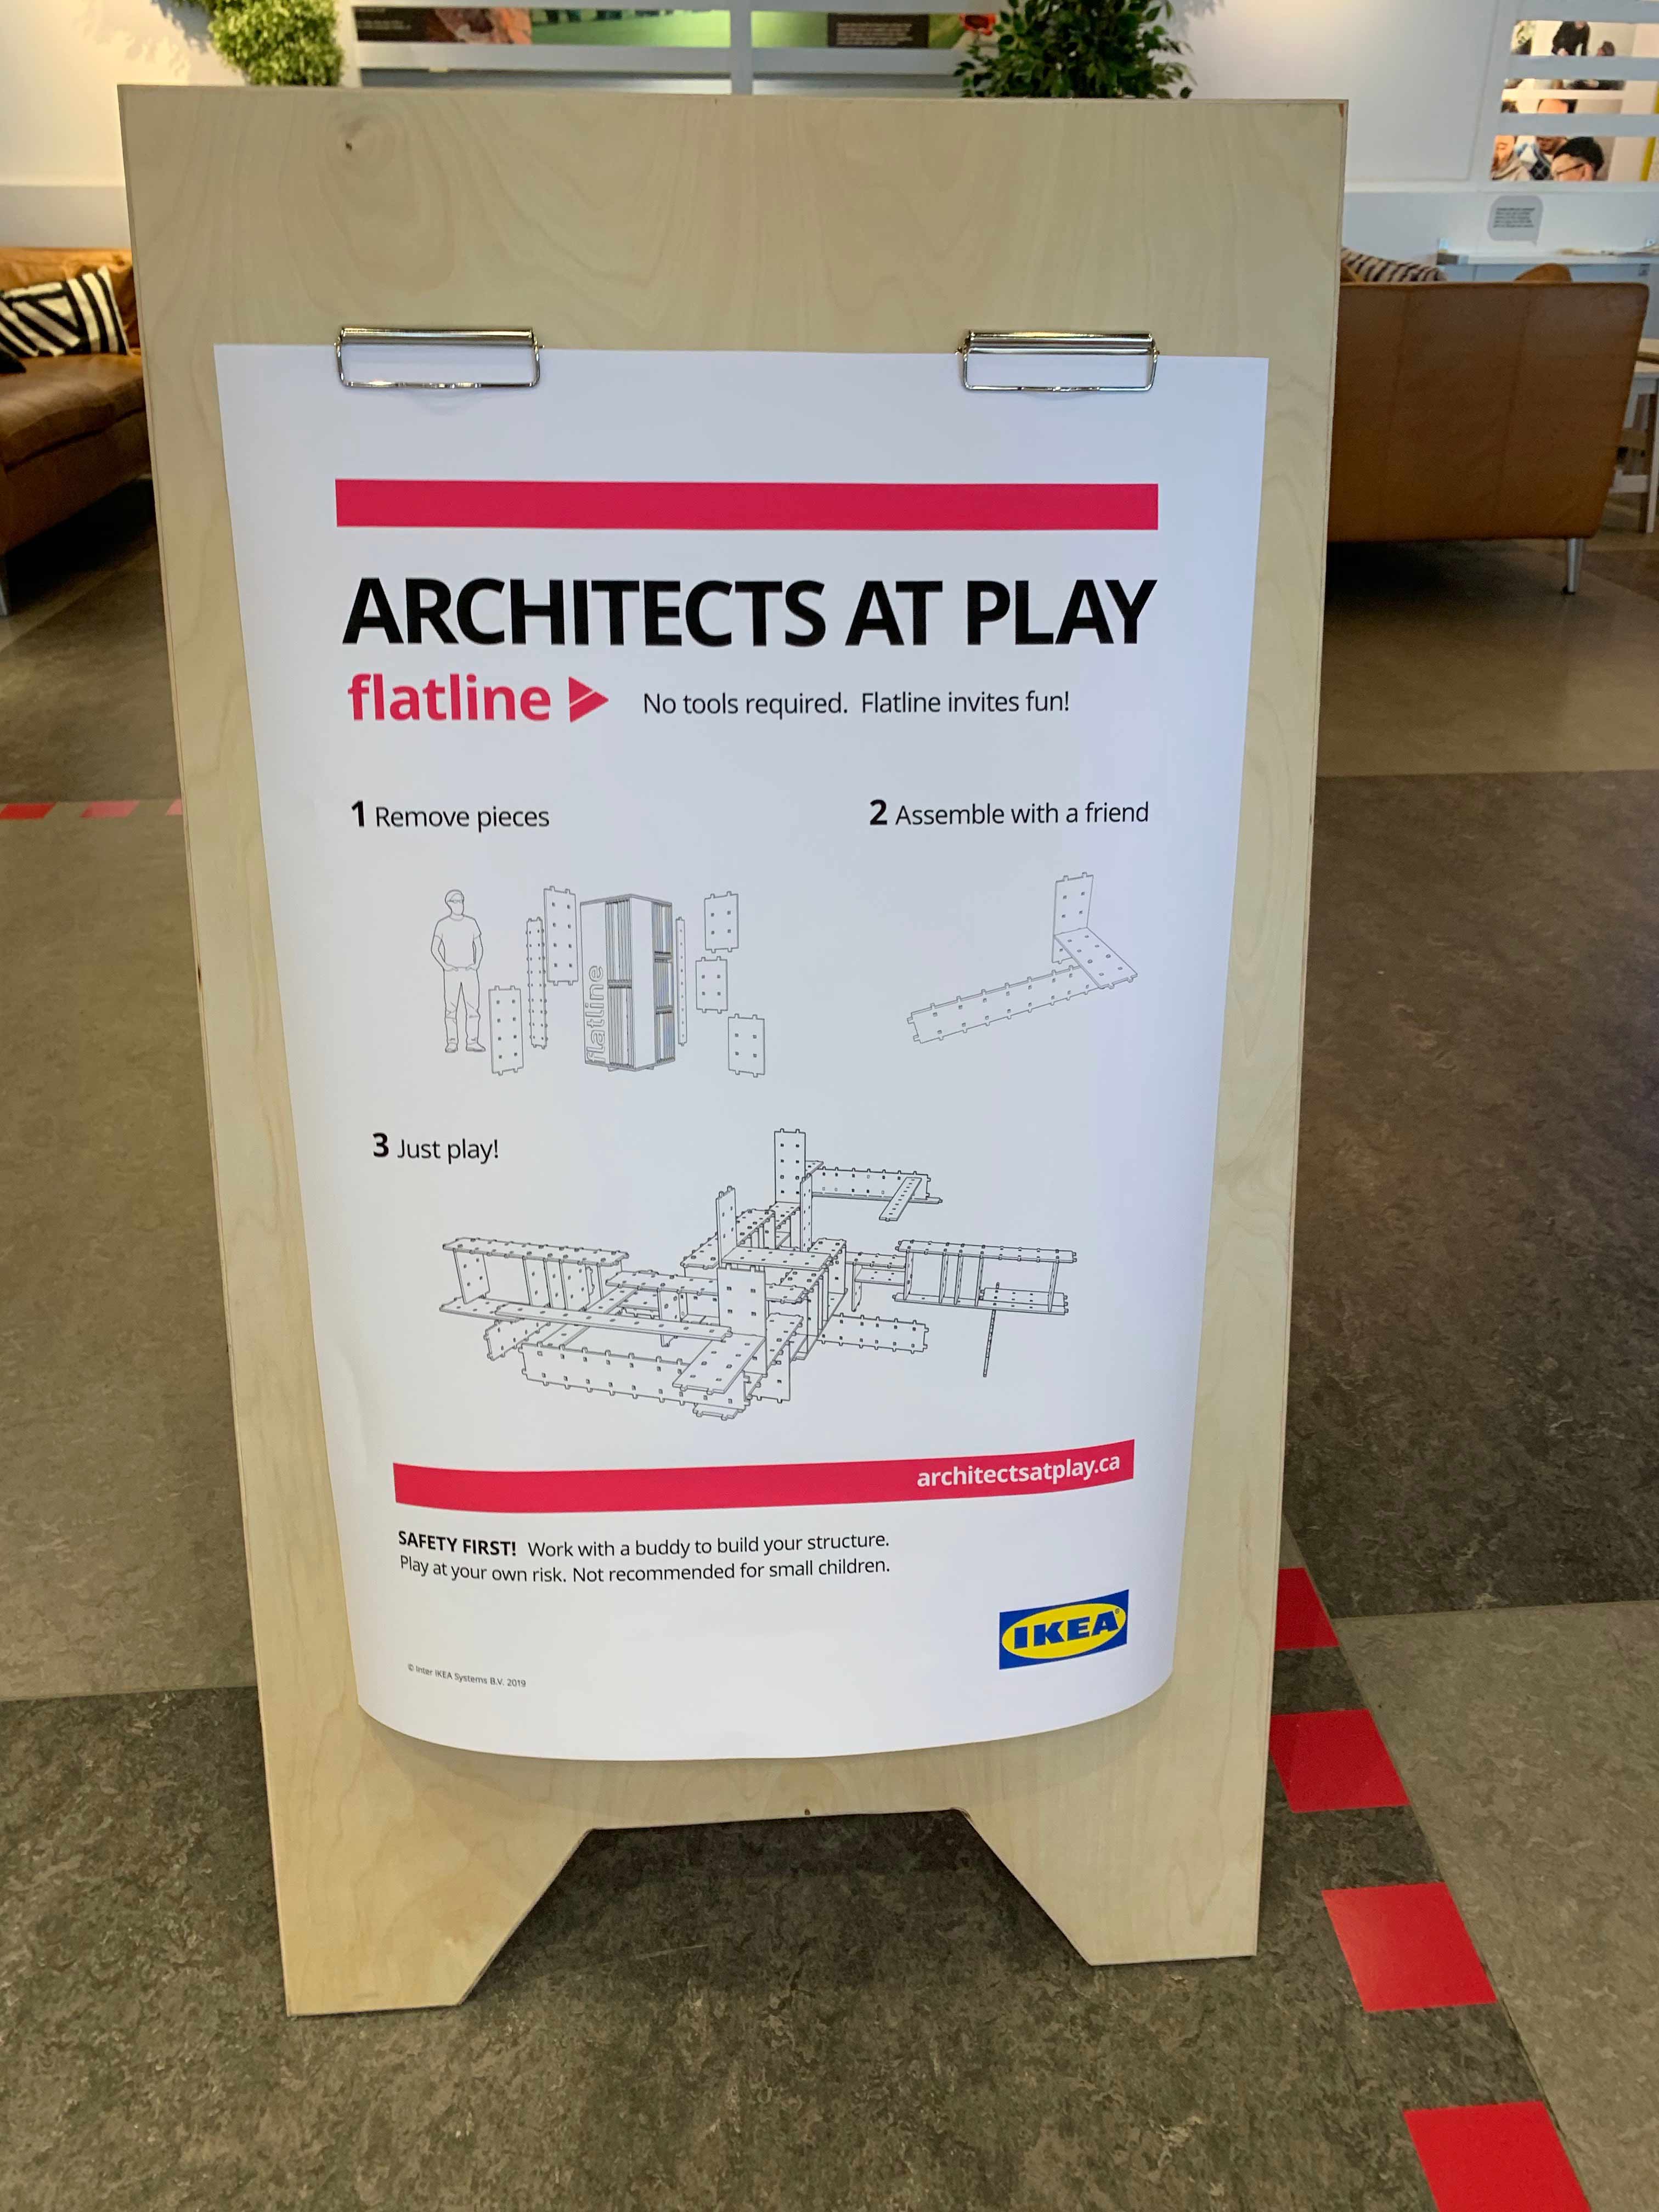 IKEA signage for the installation